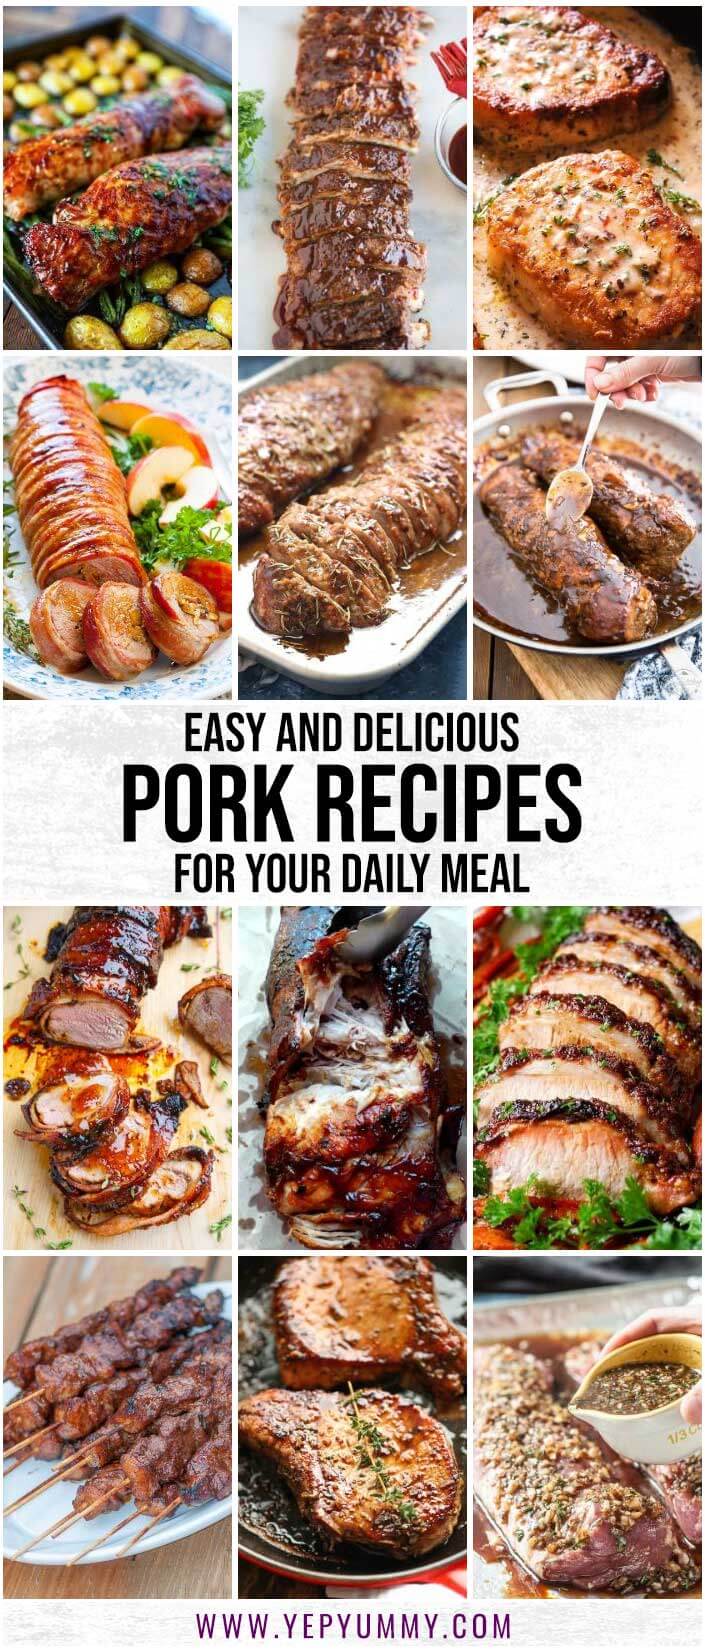 Easy And Delicious Pork Recipes For Your Daily Meal